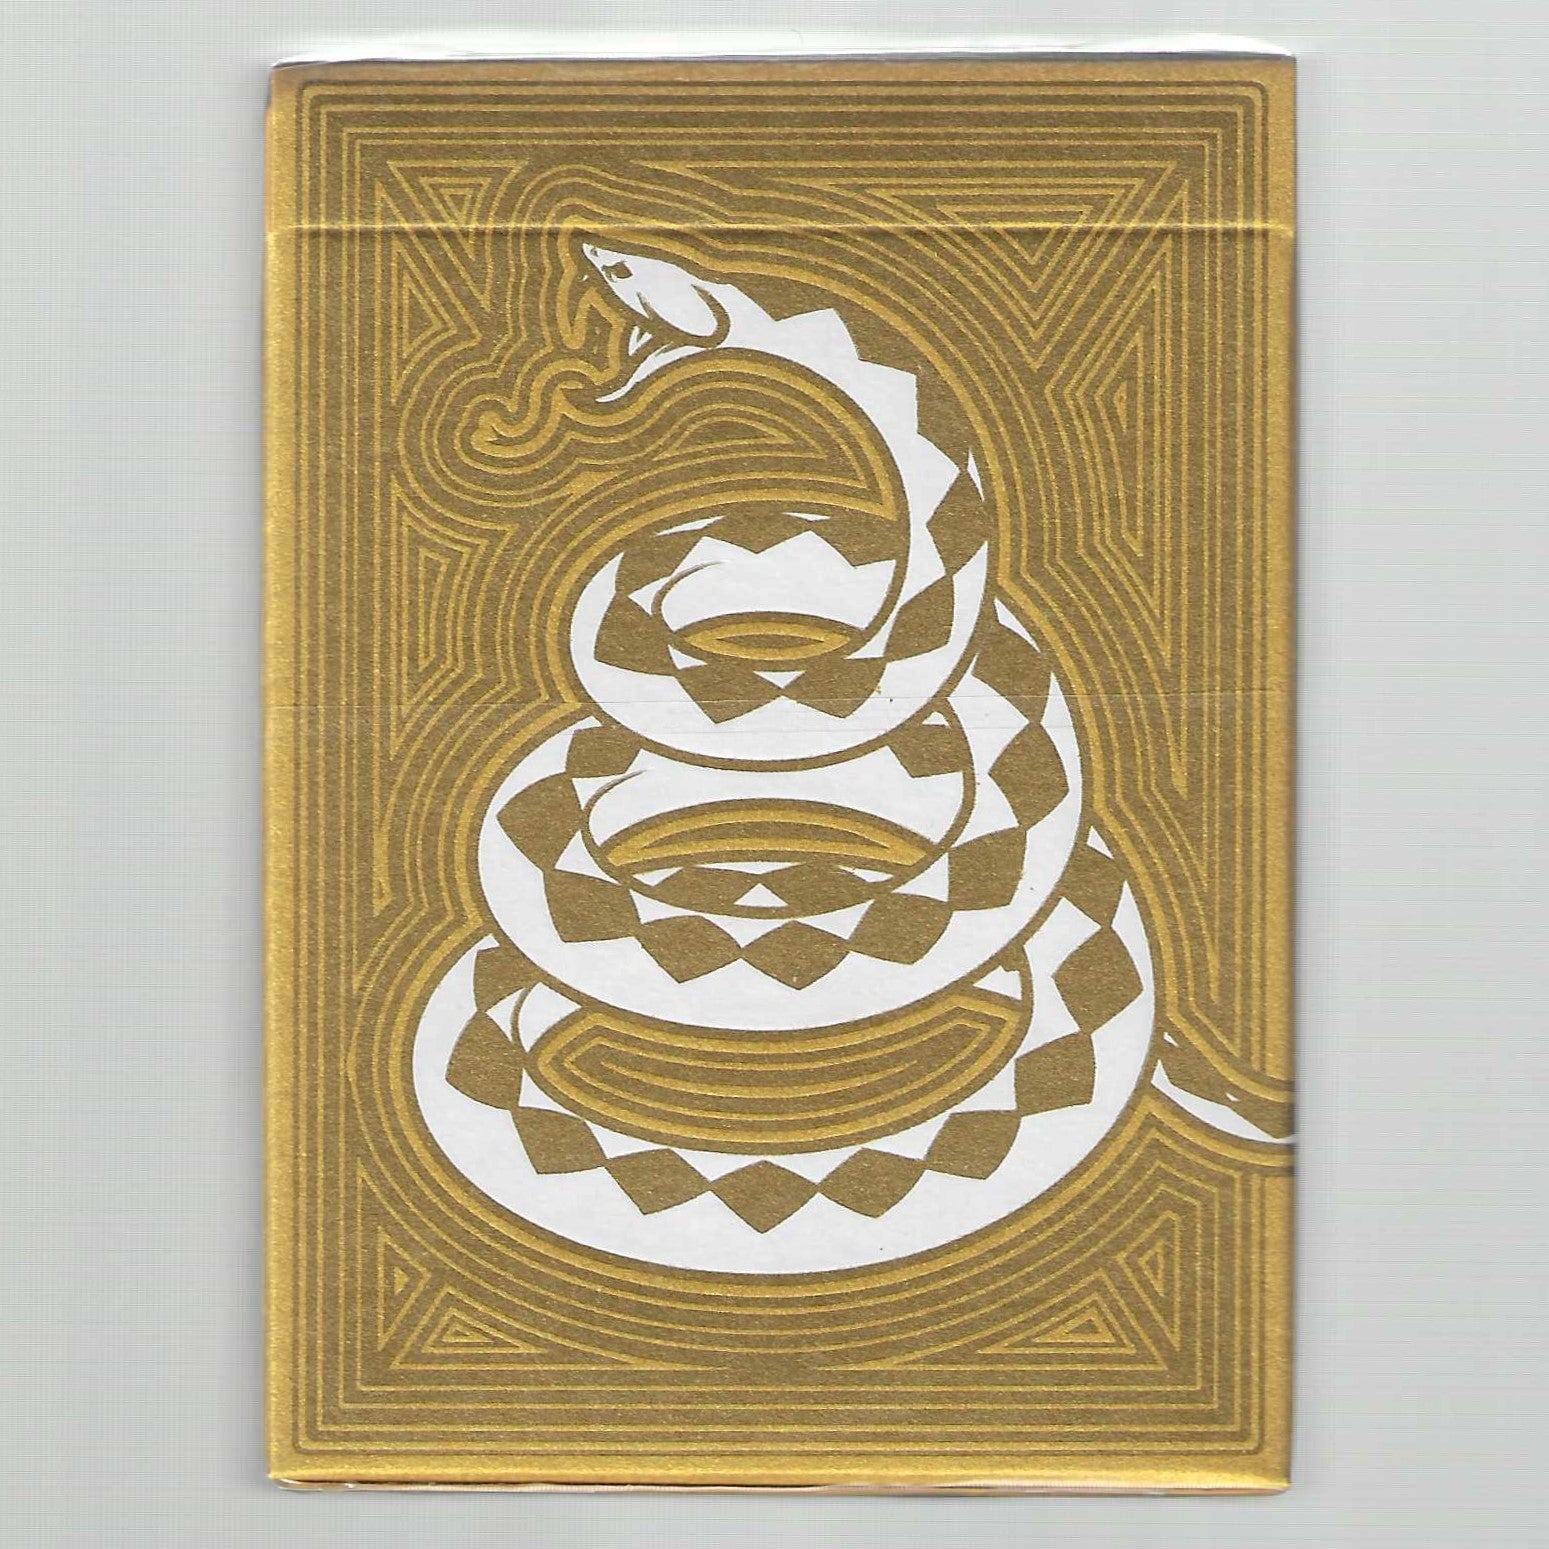 Gadsden/"Don't Tread on Me" (Limited Edition, #183/500) [AUCTION]